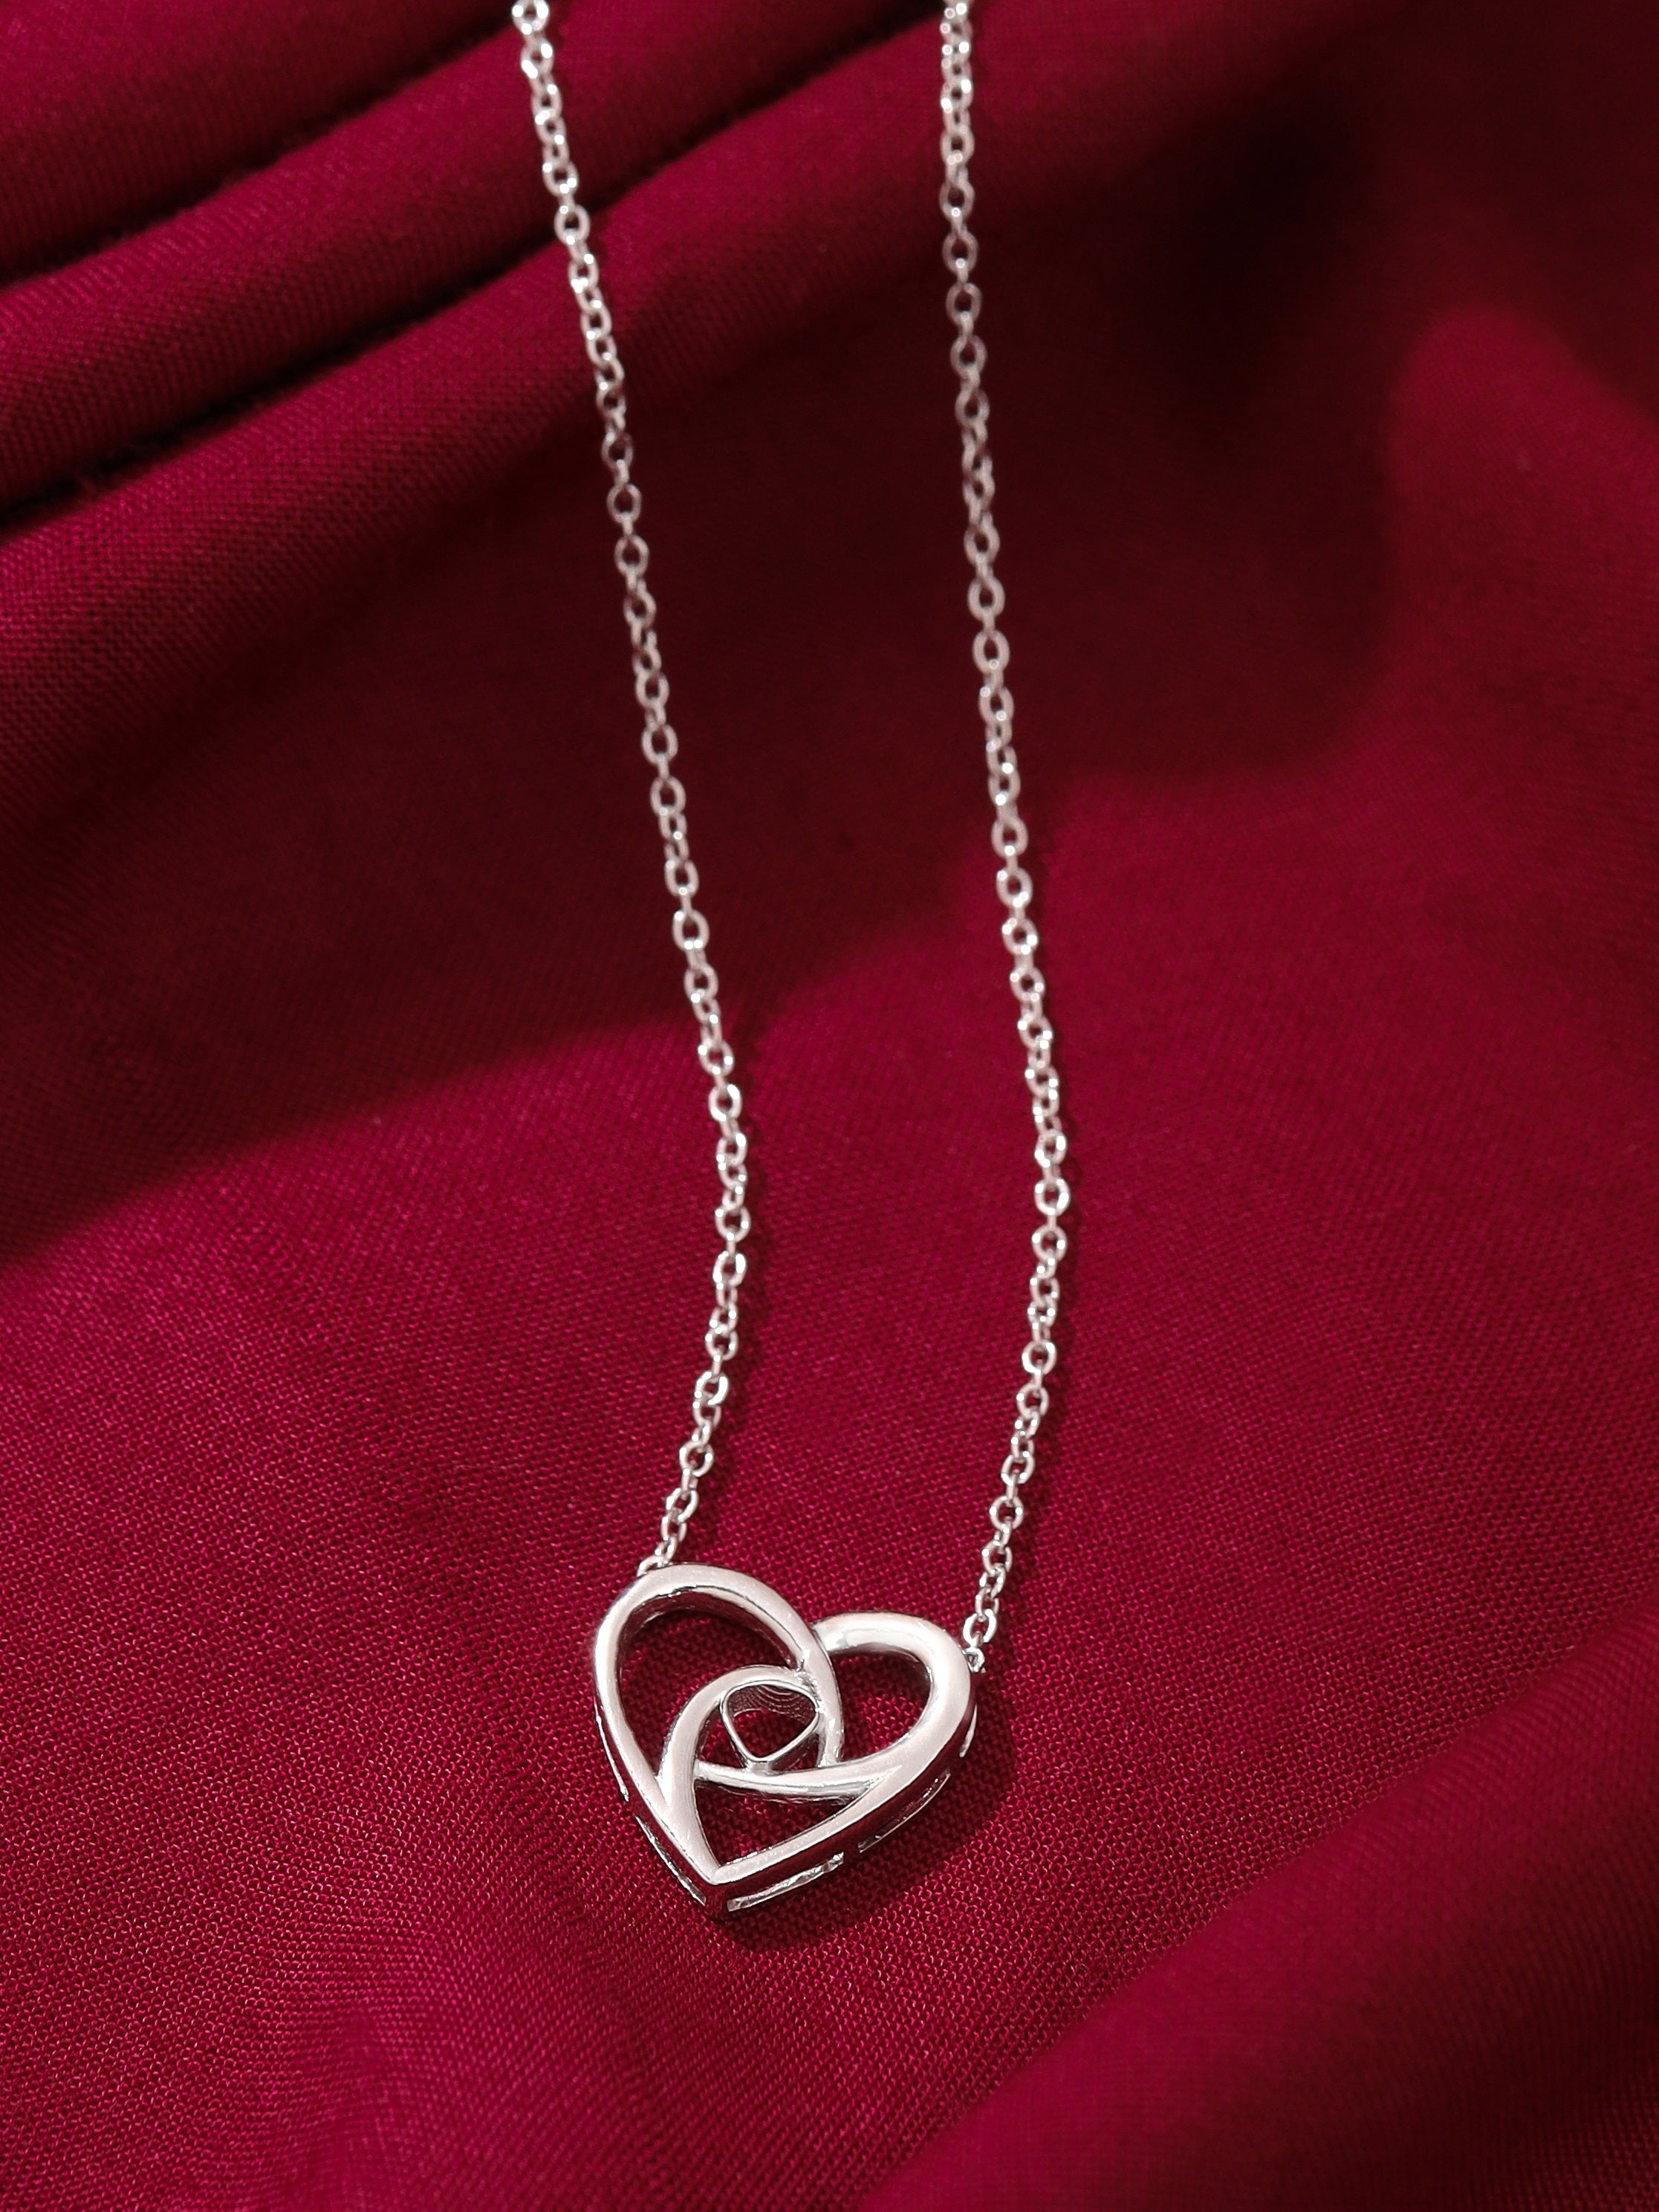 Real Rhodium Plating Heart in Jali Design Elysian Collection Pendant